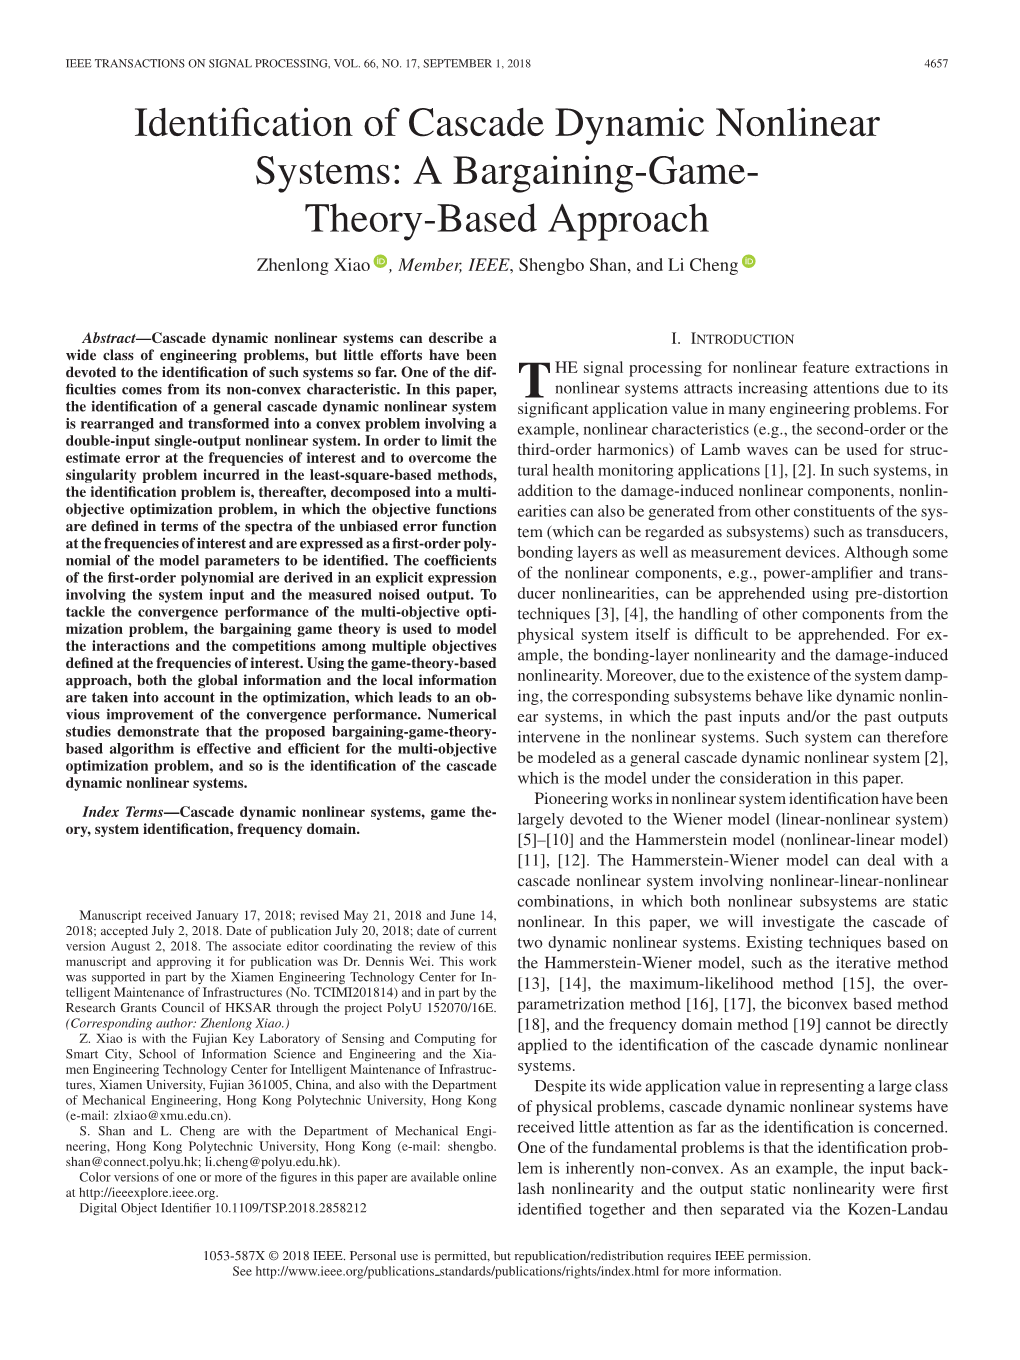 Identification of Cascade Dynamic Nonlinear Systems: a Bargaining-Game-Theory-Based Approach 4659